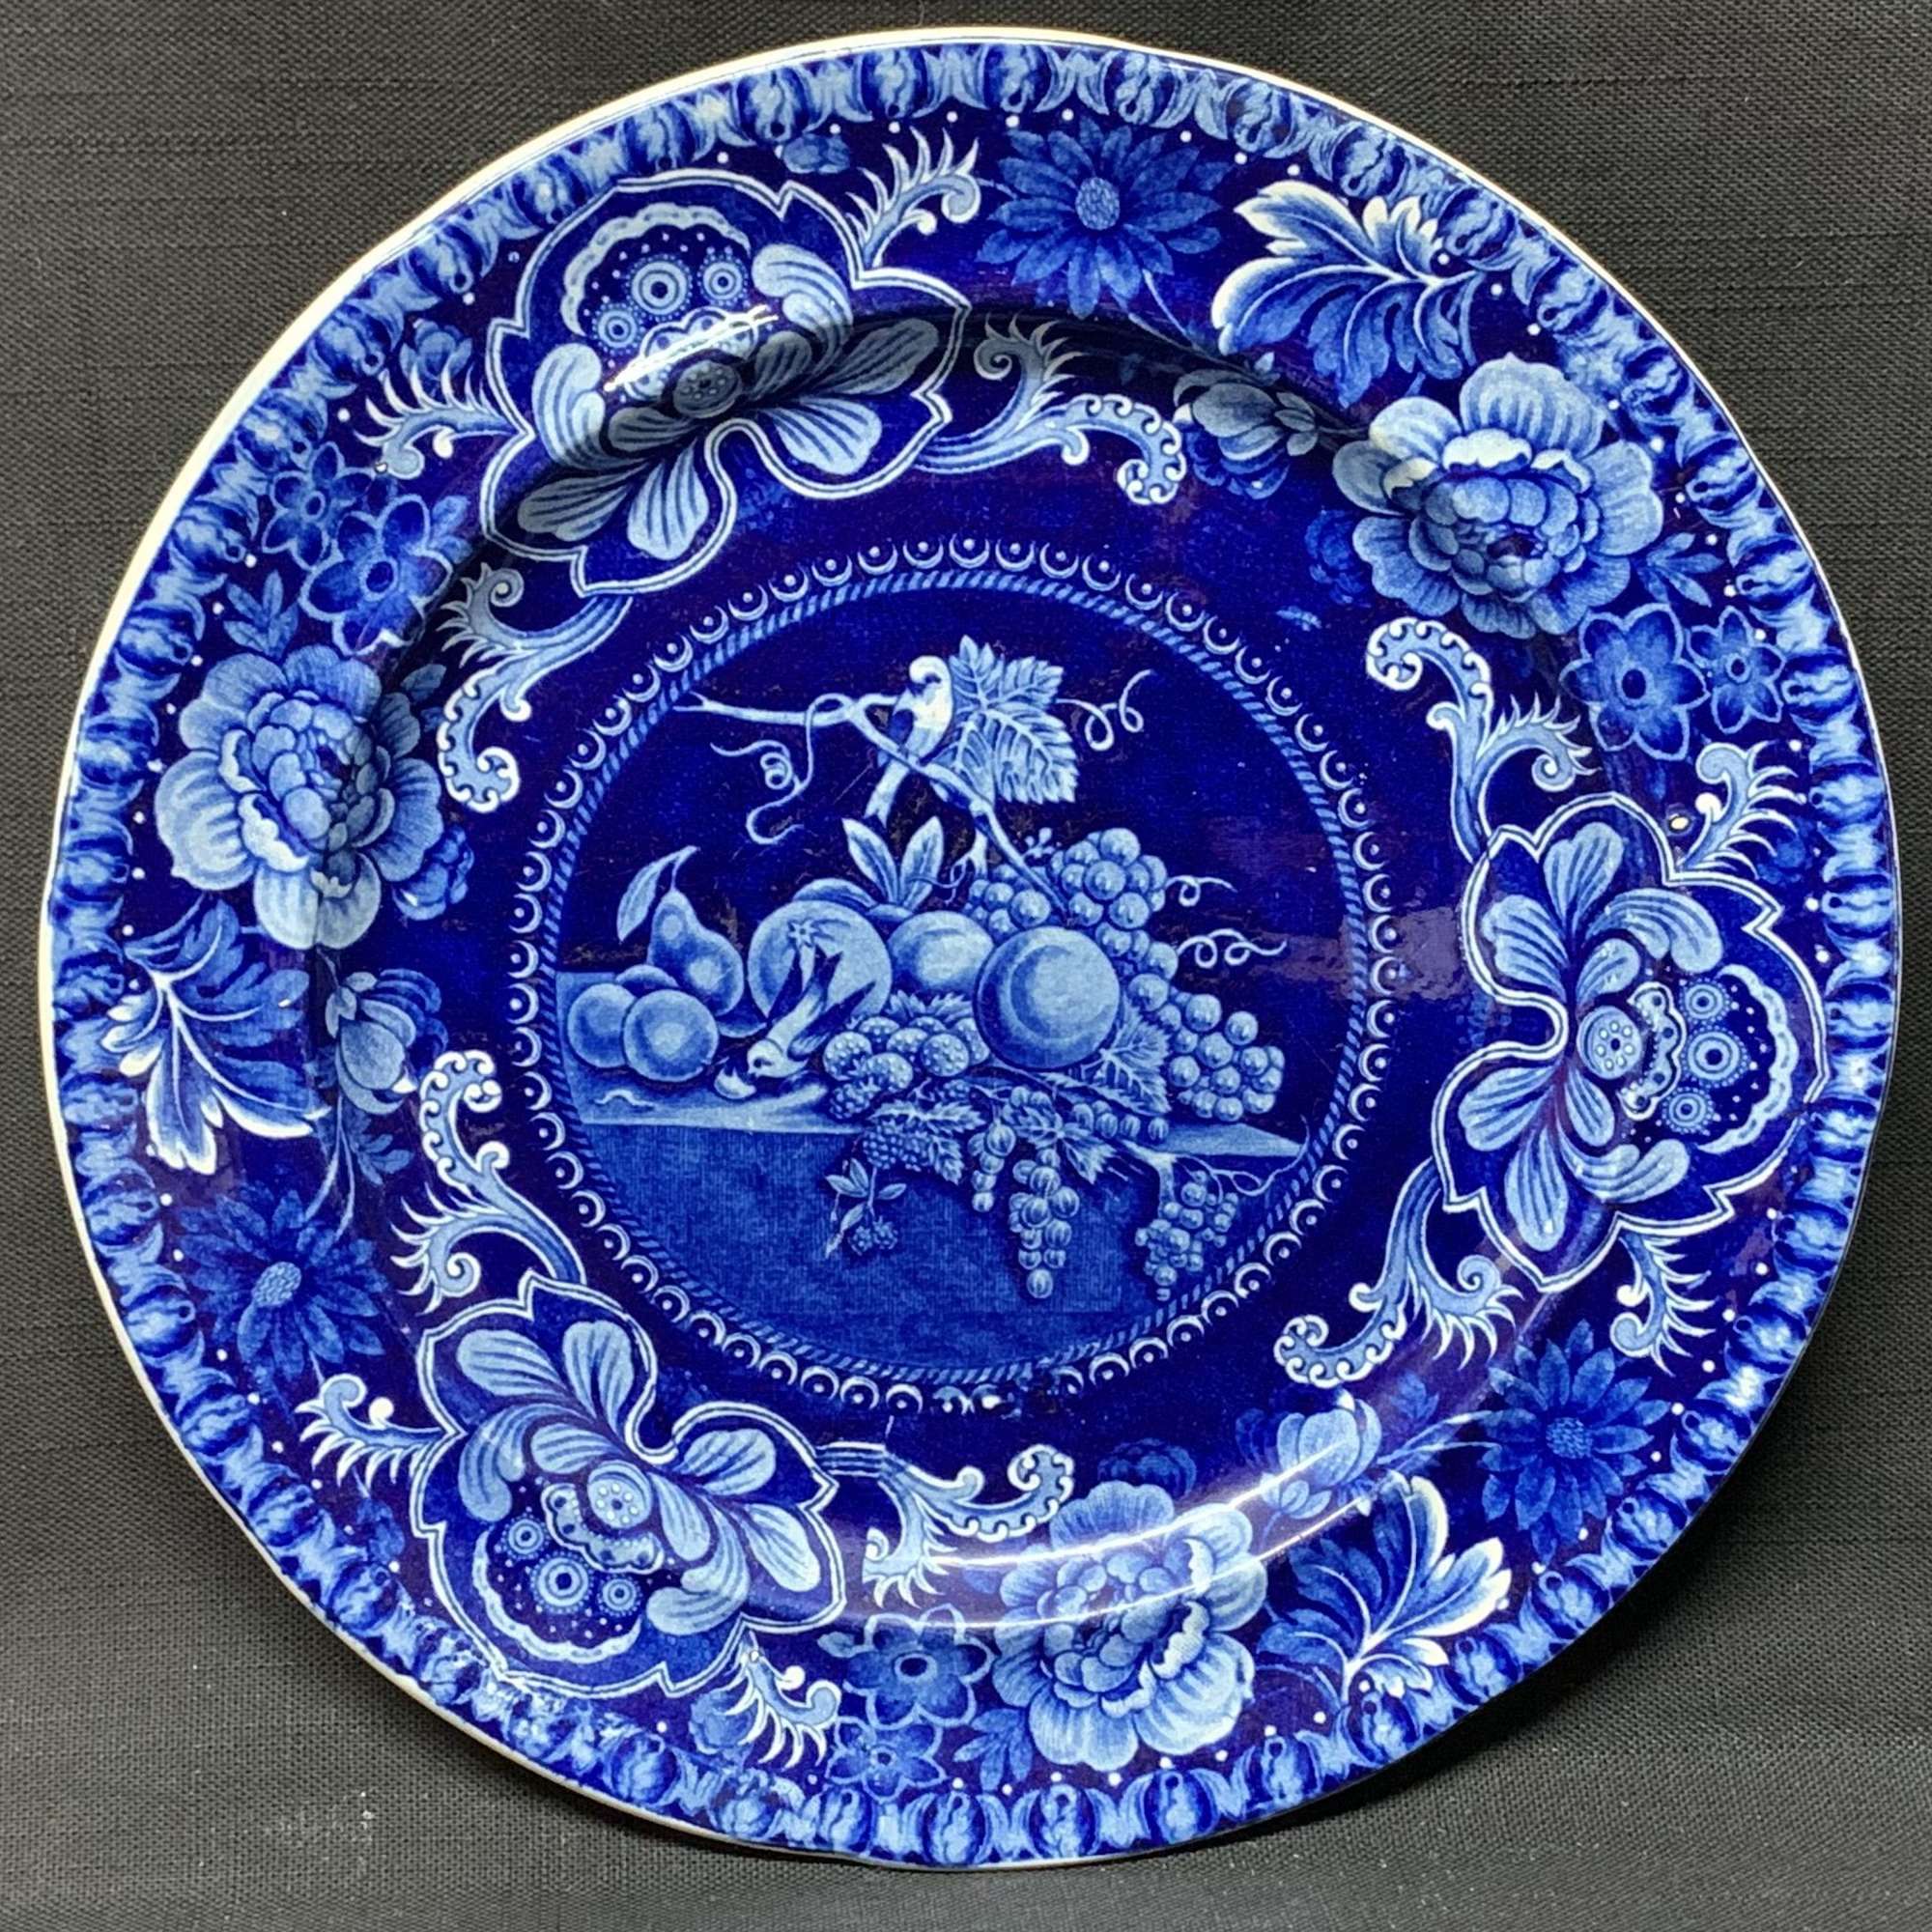 Early Staffordshire Dark Blue Transferware Plate ~ Fruit and Flowers 1